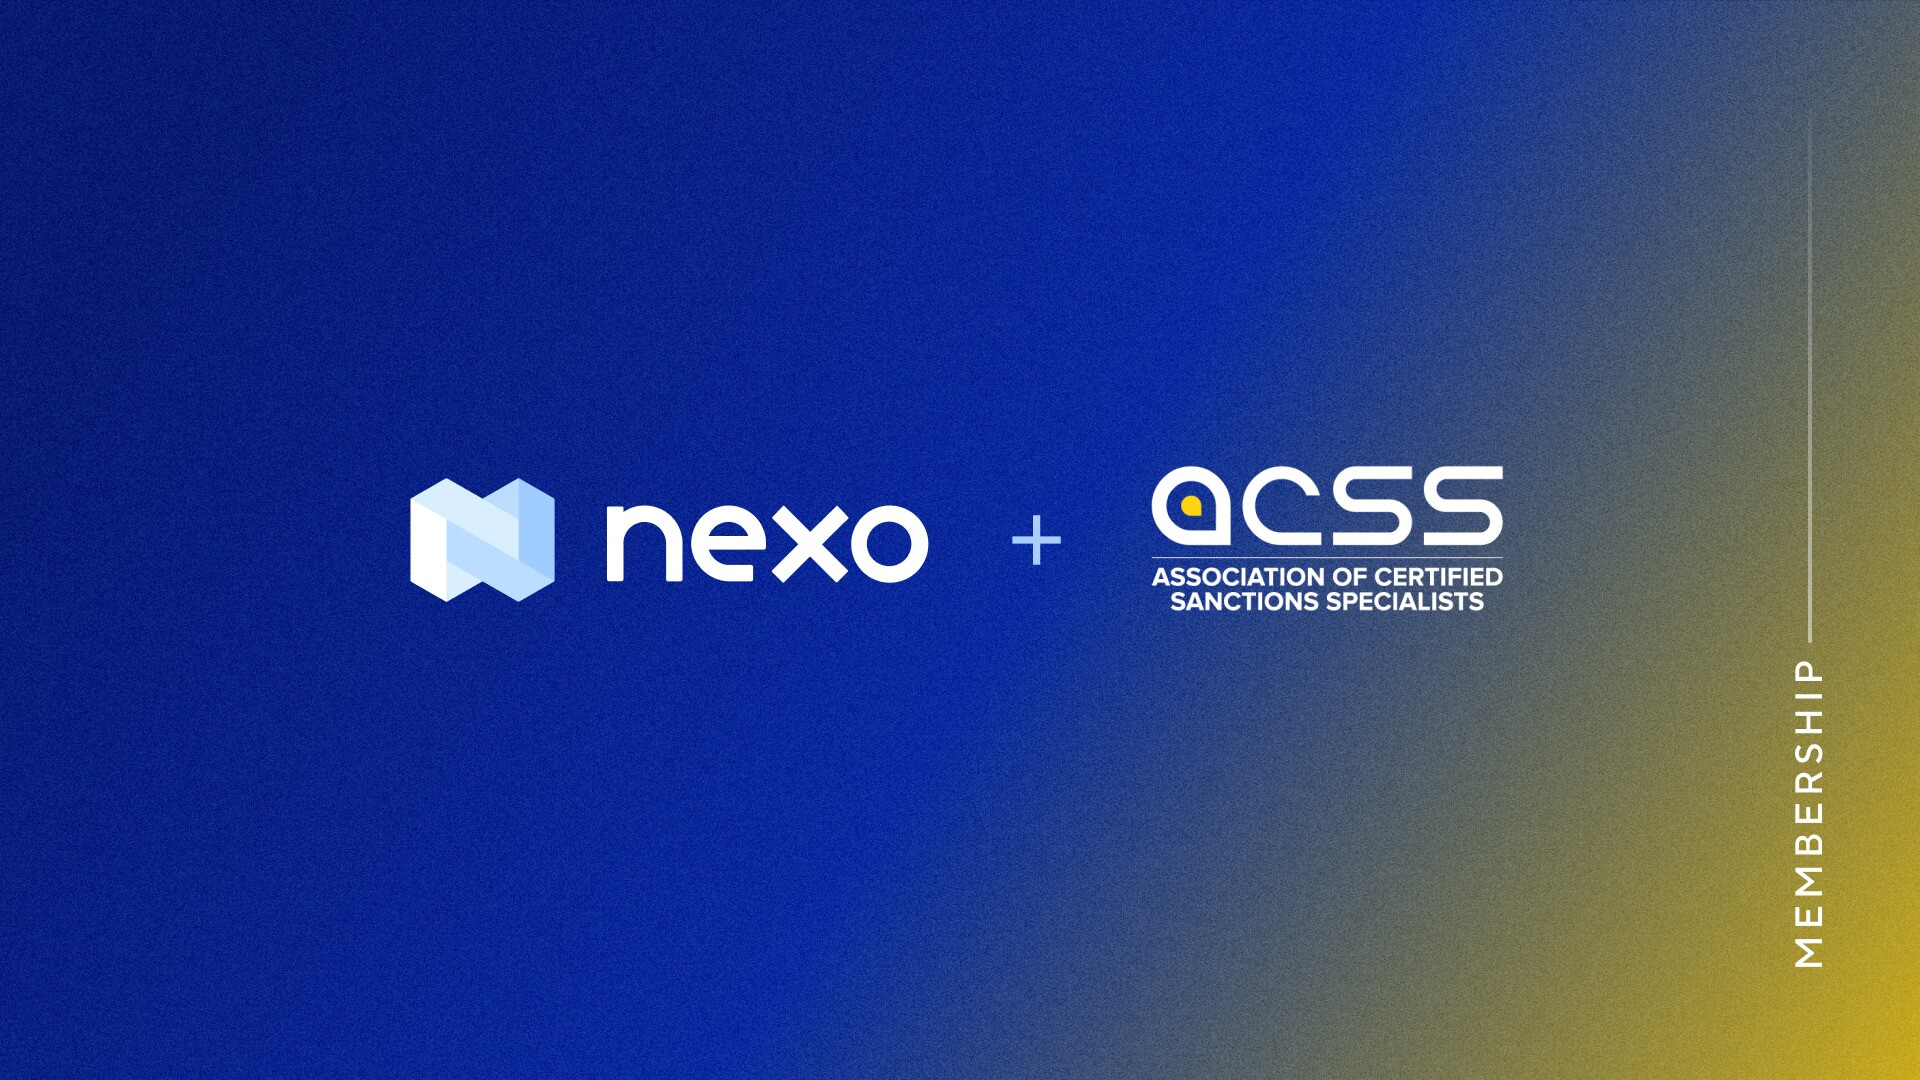 Nexo Champions Crypto Compliance, Joining Forces with ACSS to Enhance Industry Standards